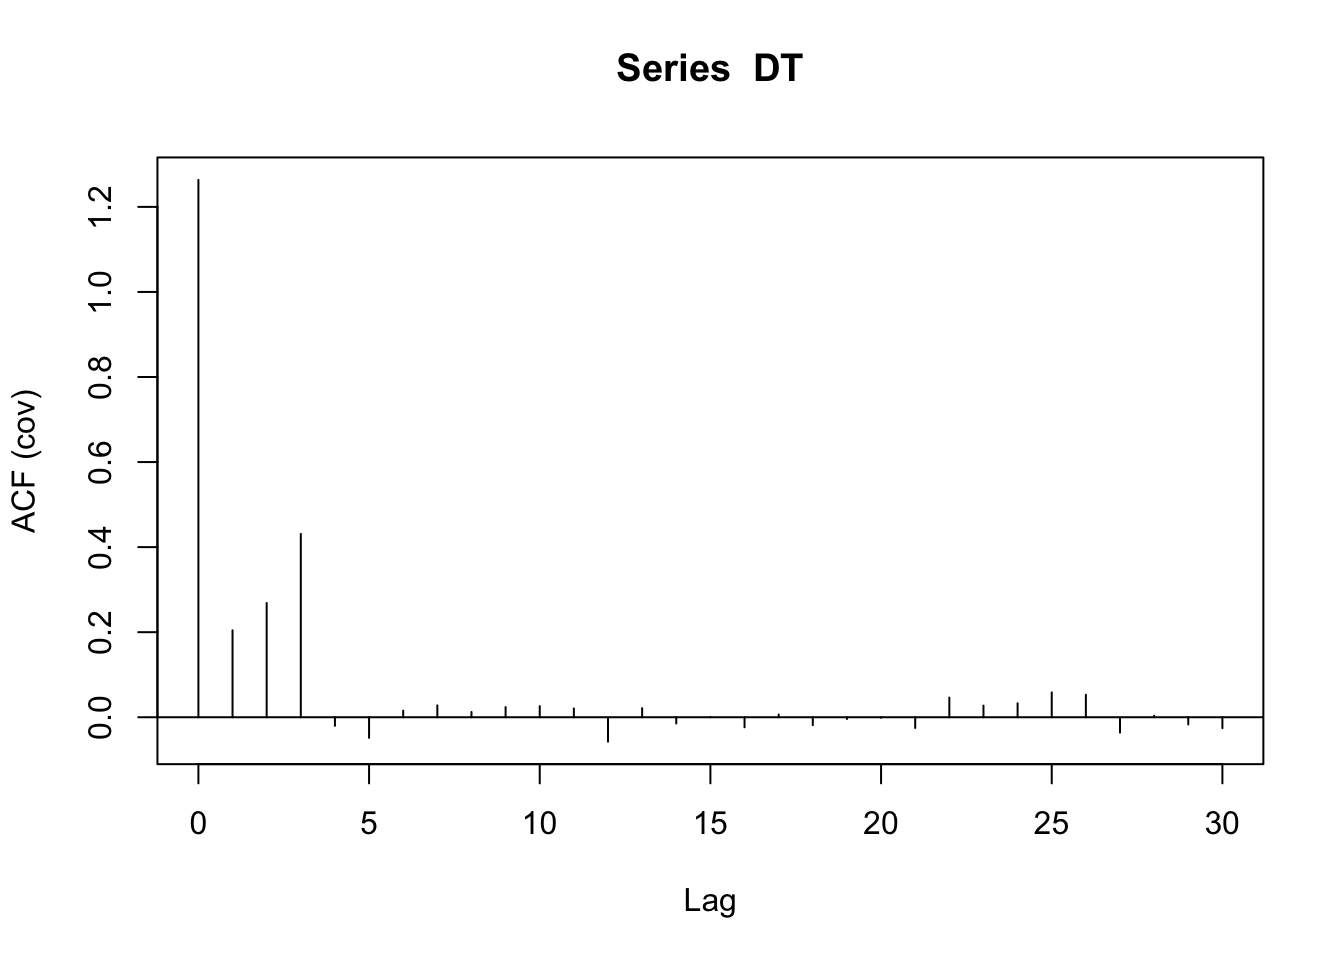 A plot of the autocorrelation function: this shows the correlation between $y_t$ and different lagged values of $y_t$. The first four correlations (starting with the correlation of $y_t$ and $y_t$) are positive and then the rest are close to 0; this is what we would expect from the data generating process.